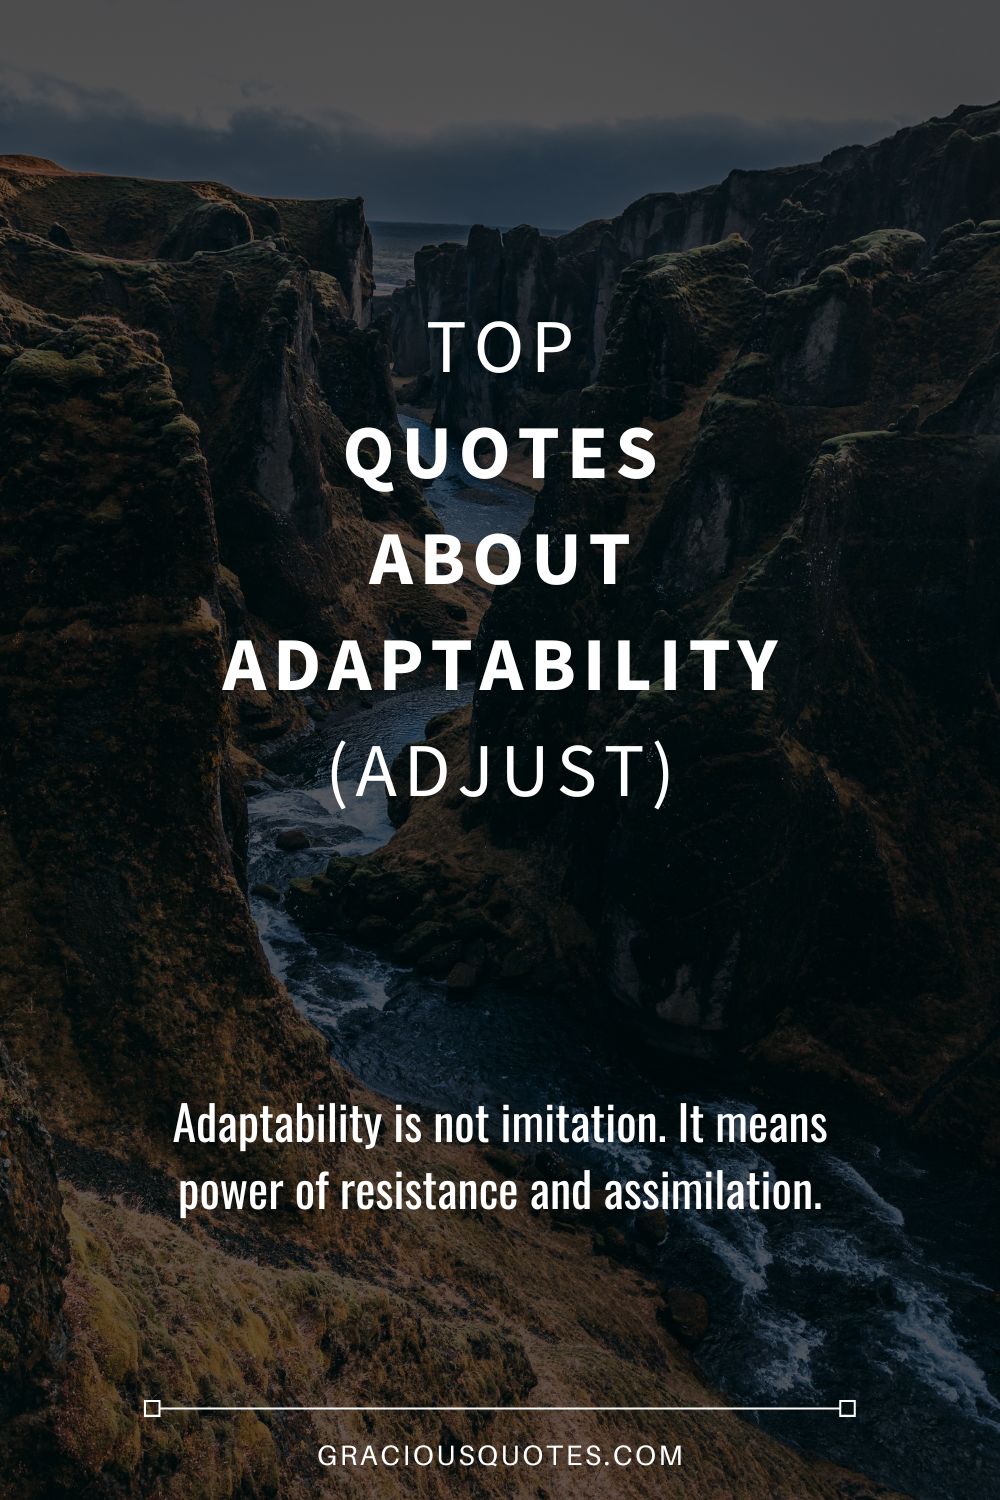 Top Quotes About Adaptability (ADJUST) - Gracious Quotes